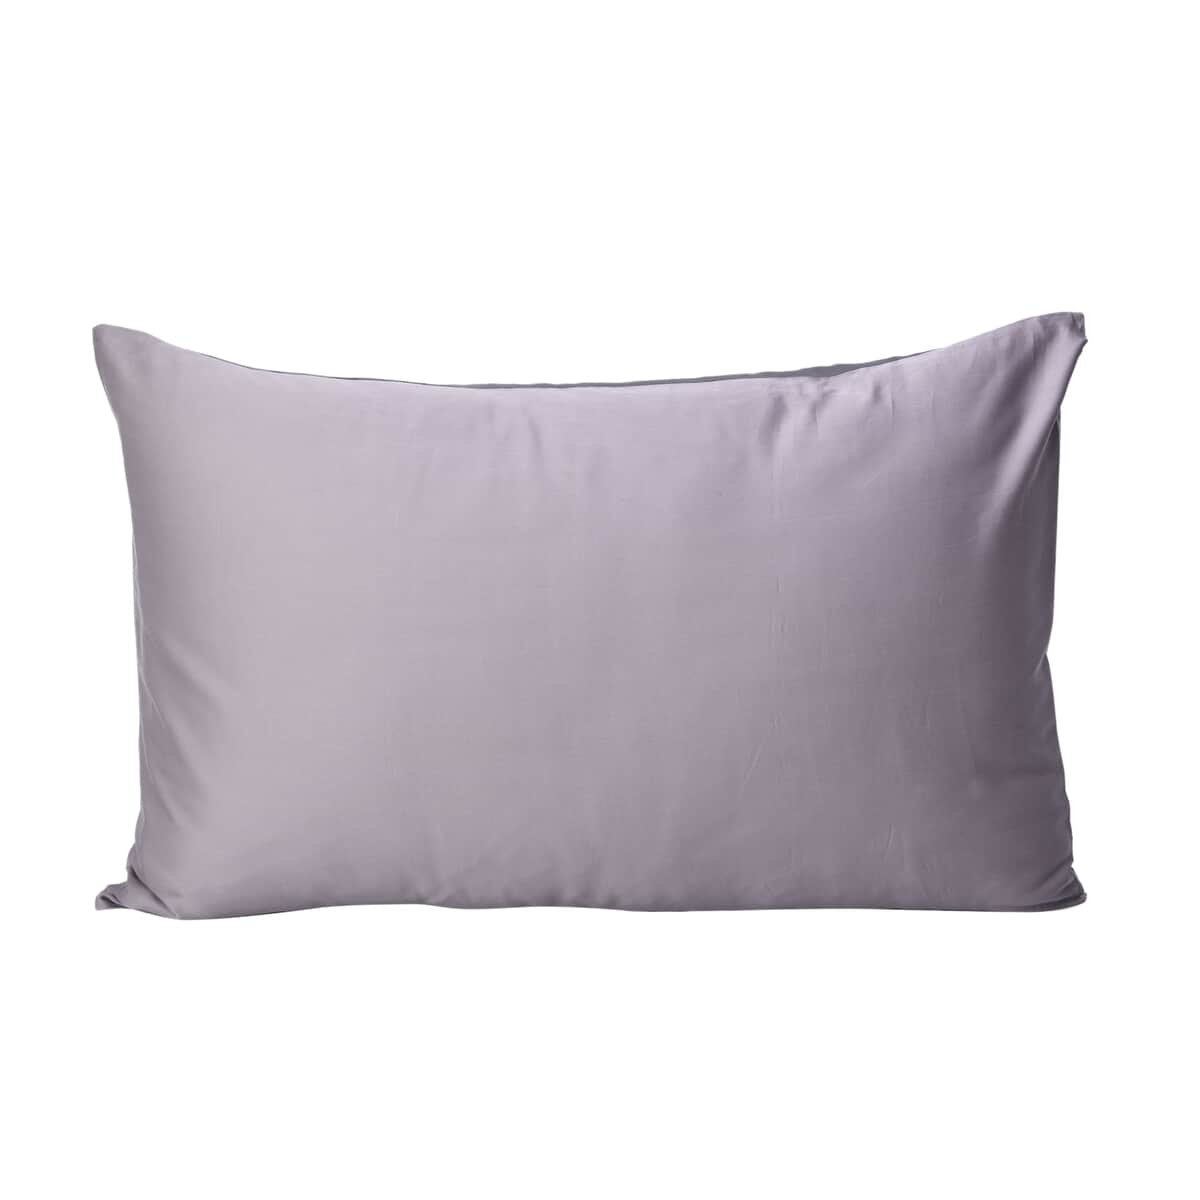 SYMPHONY HOME Gray 100% Mulberry Silk Pillowcase Infused with Hyaluronic Acid & Argan Oil - Queen , Pillow Protectors , Pillow Cover , Cushion Cover , Pillow Shams , Pillow Case Covers image number 3